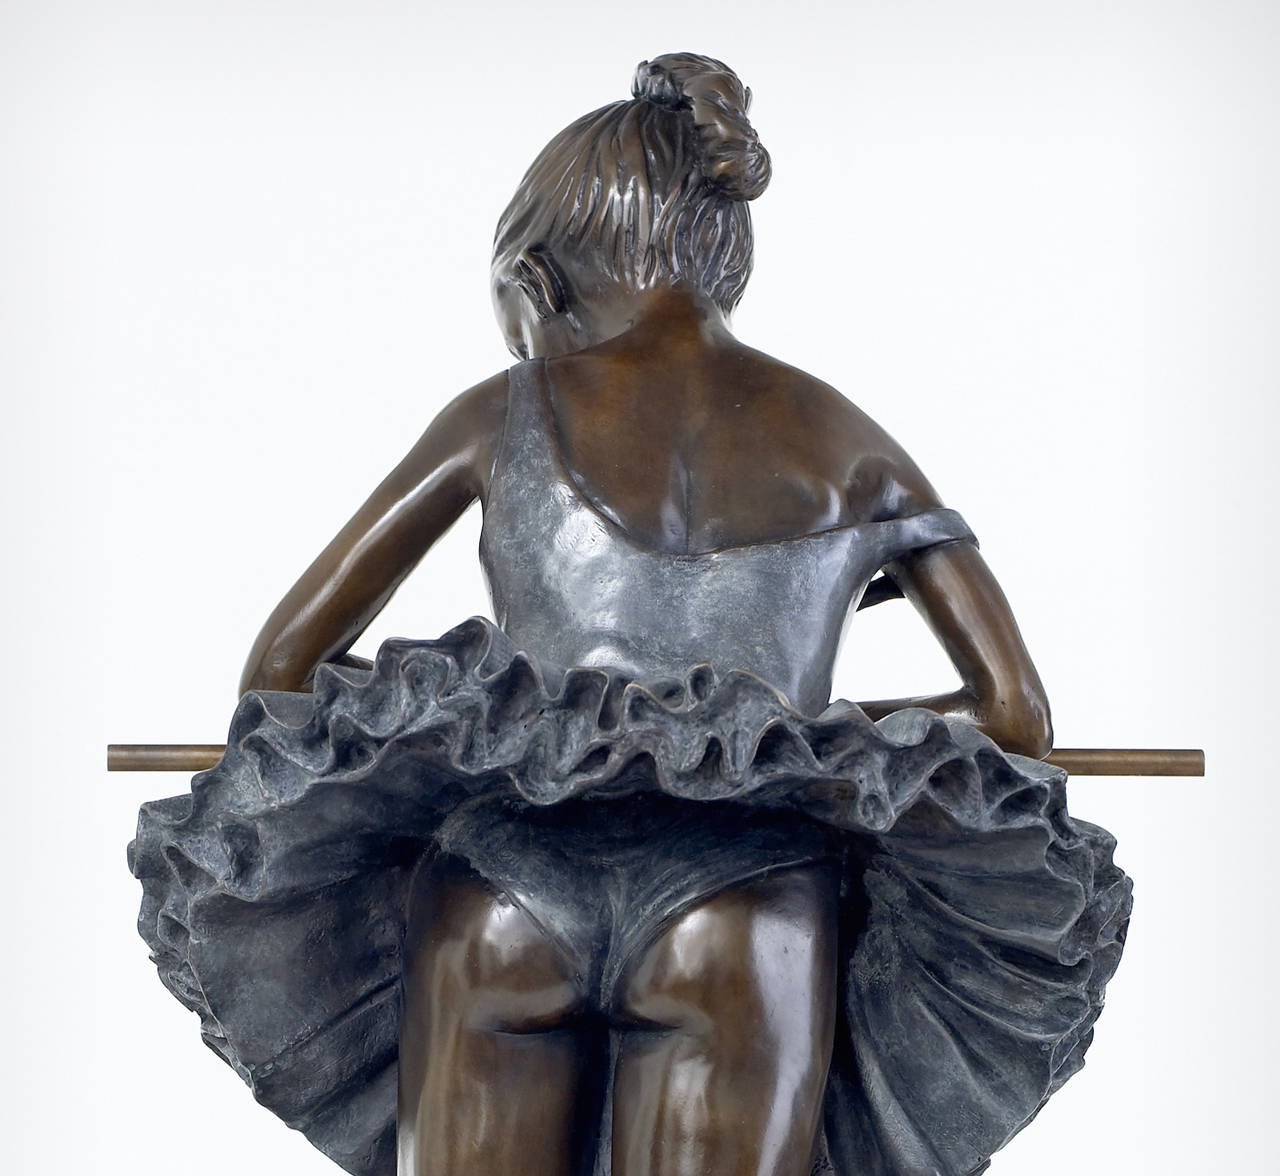 'Tutu' is a beautiful sculpture of a ballerina leaning 'en barre'. The elegance and grace of the ballerina is perfectly depicted in the sculpture.
Benson's theme is predominately the wonderful world of ballet and dancers, although some are beautiful